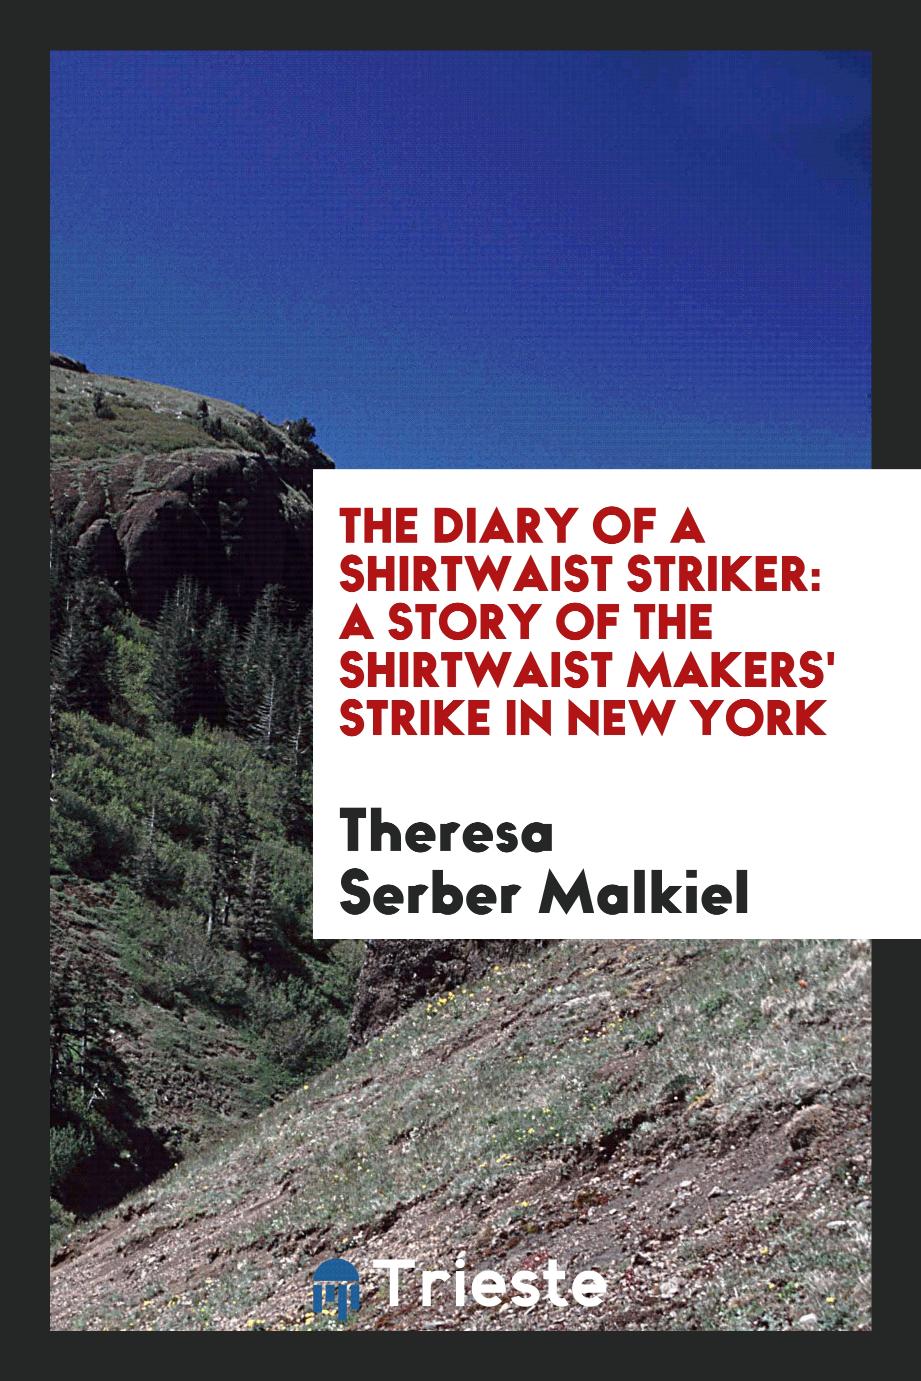 The Diary of a Shirtwaist Striker: A Story of the Shirtwaist Makers' Strike in New York